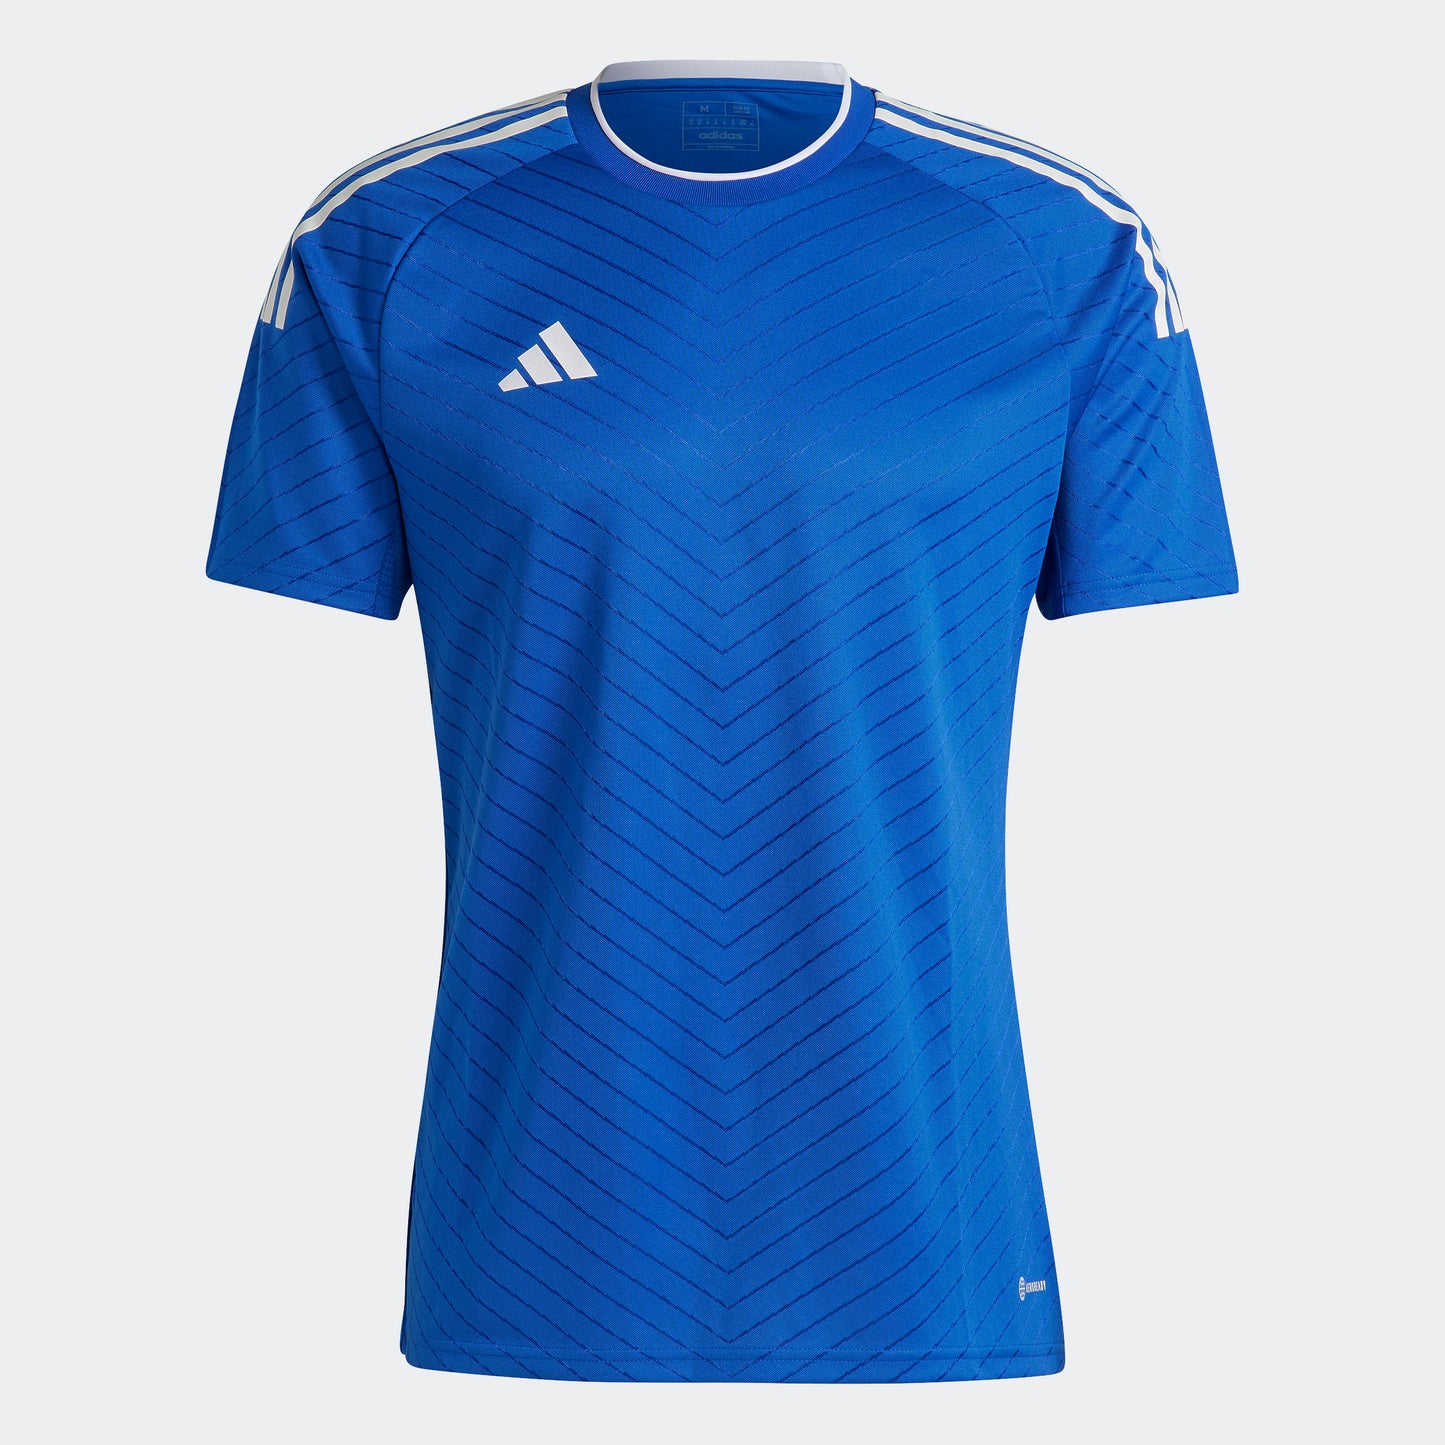 adidas Campeon 23 Jersey Team Royal Blue (Front)